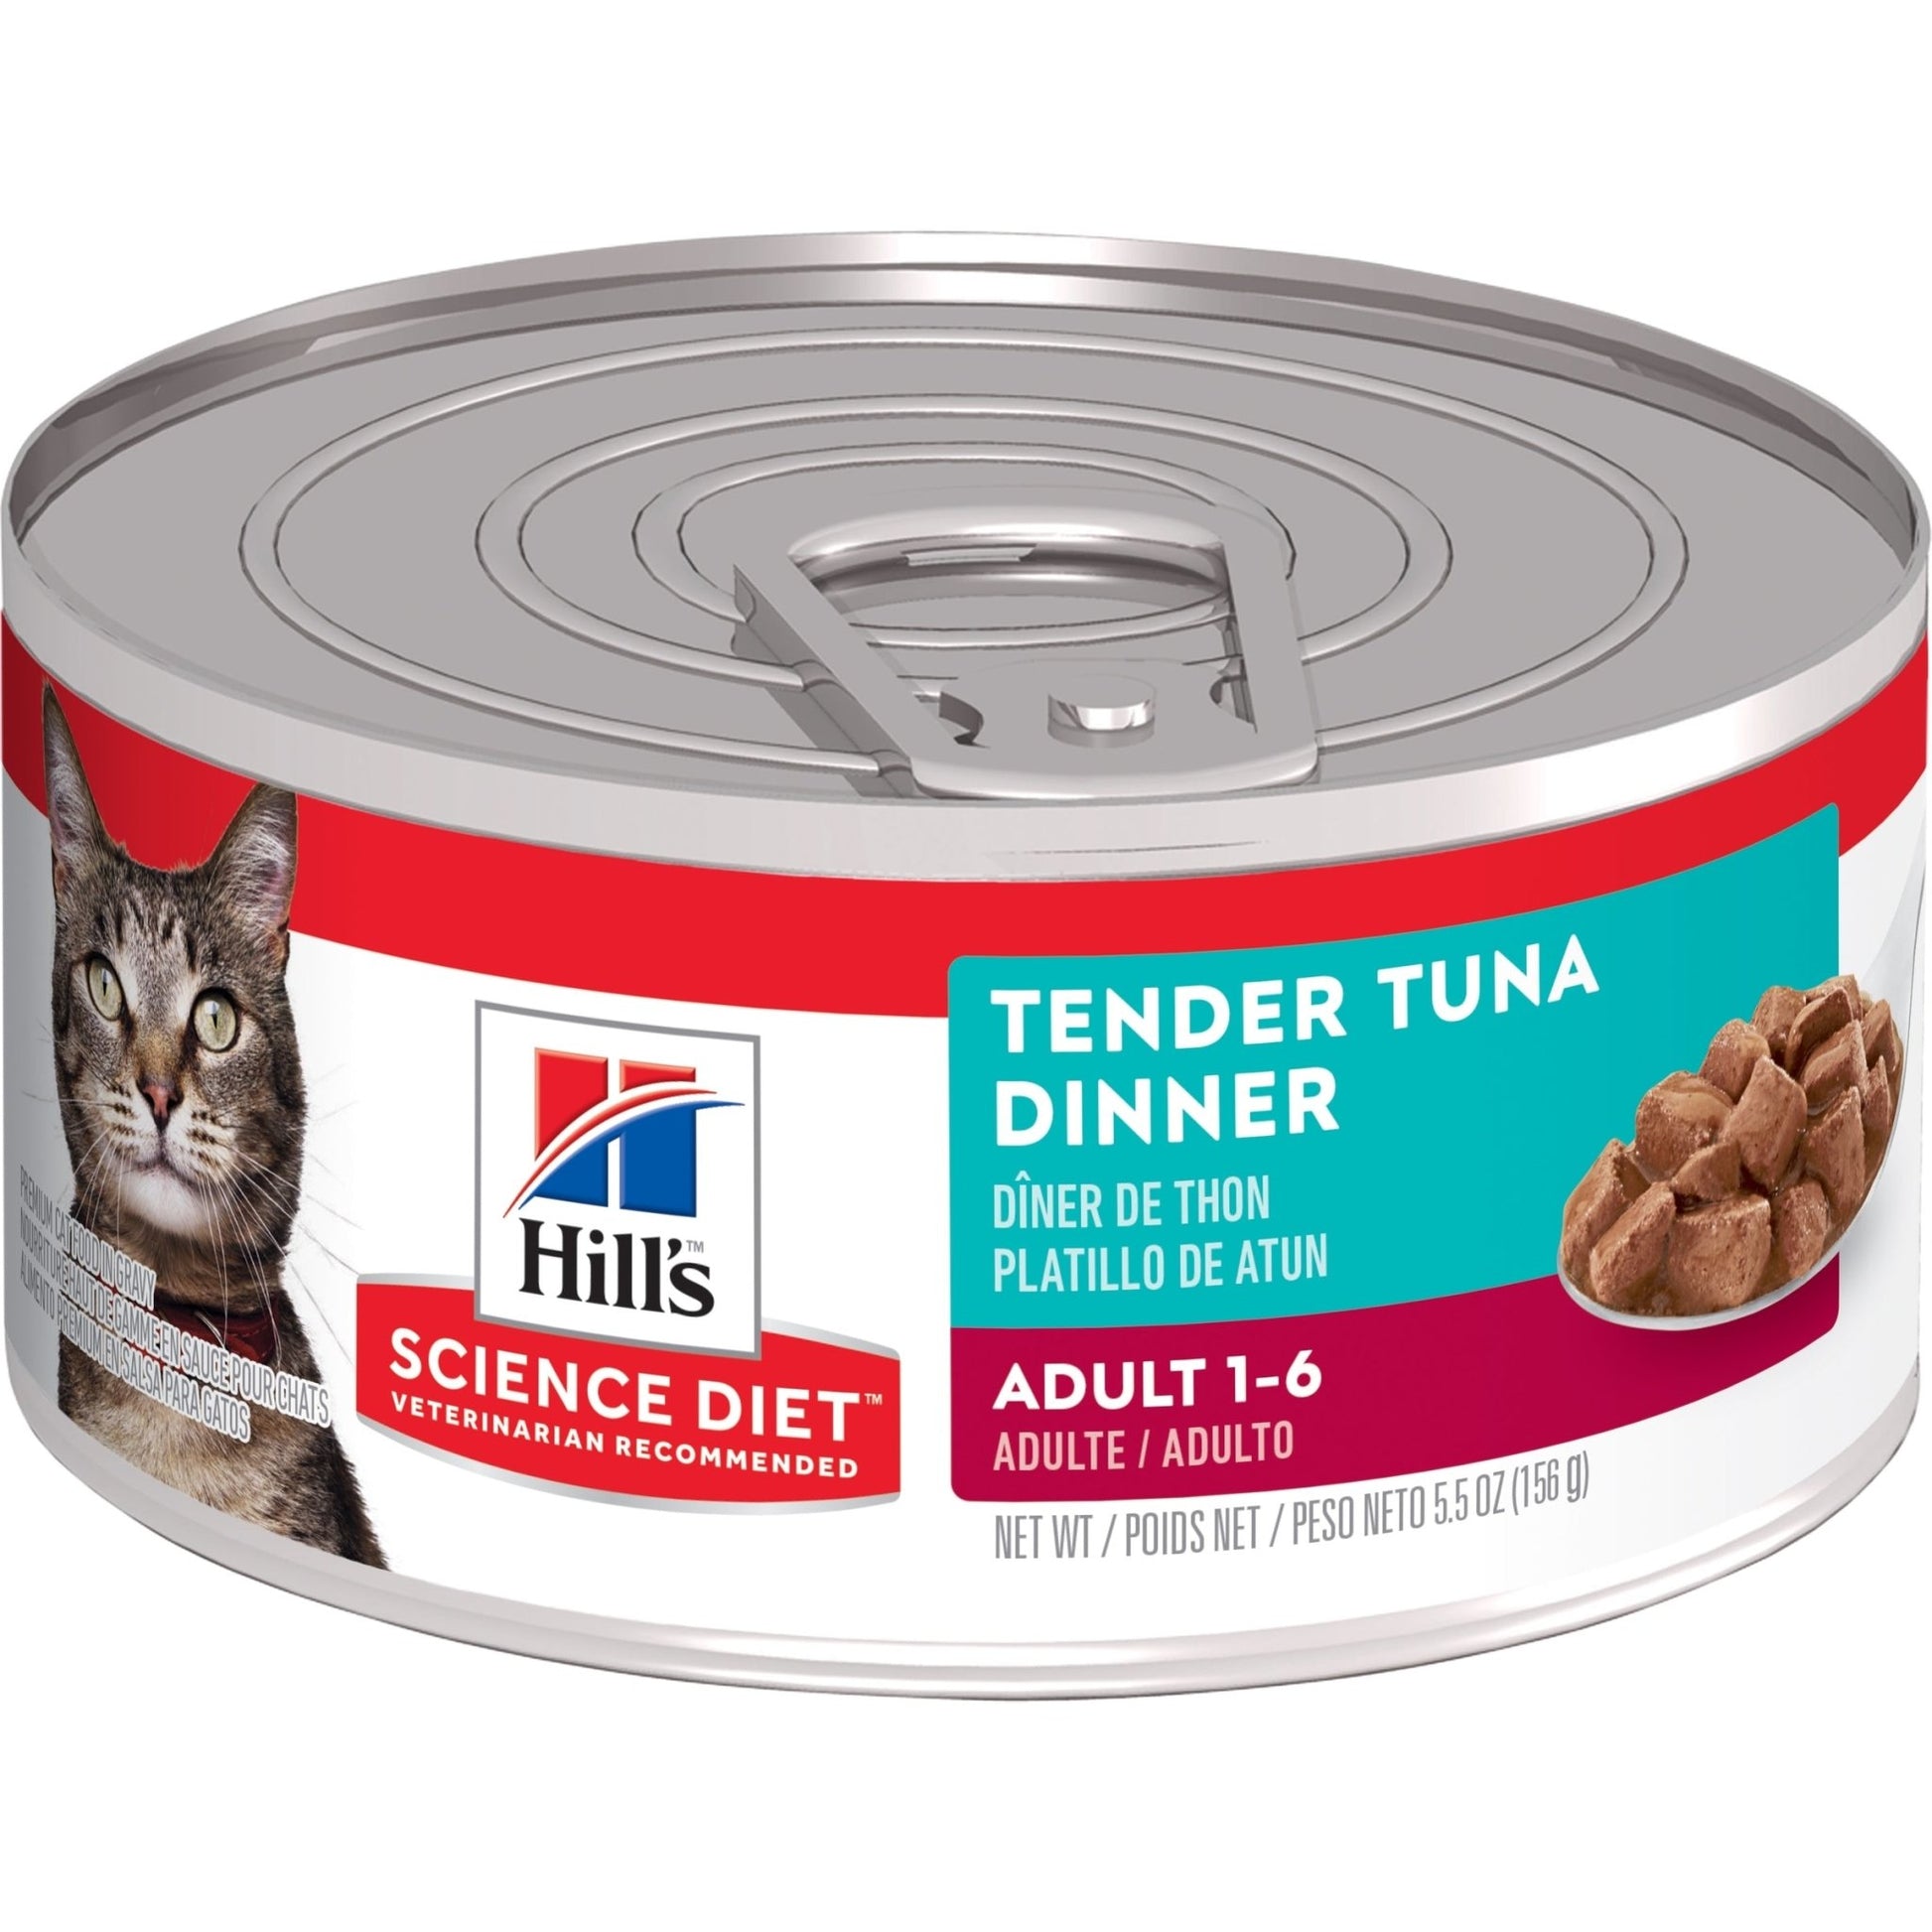 Hill's Science Diet Adult Tender Dinners Tuna Canned Cat Food 24x156g - Woonona Petfood & Produce